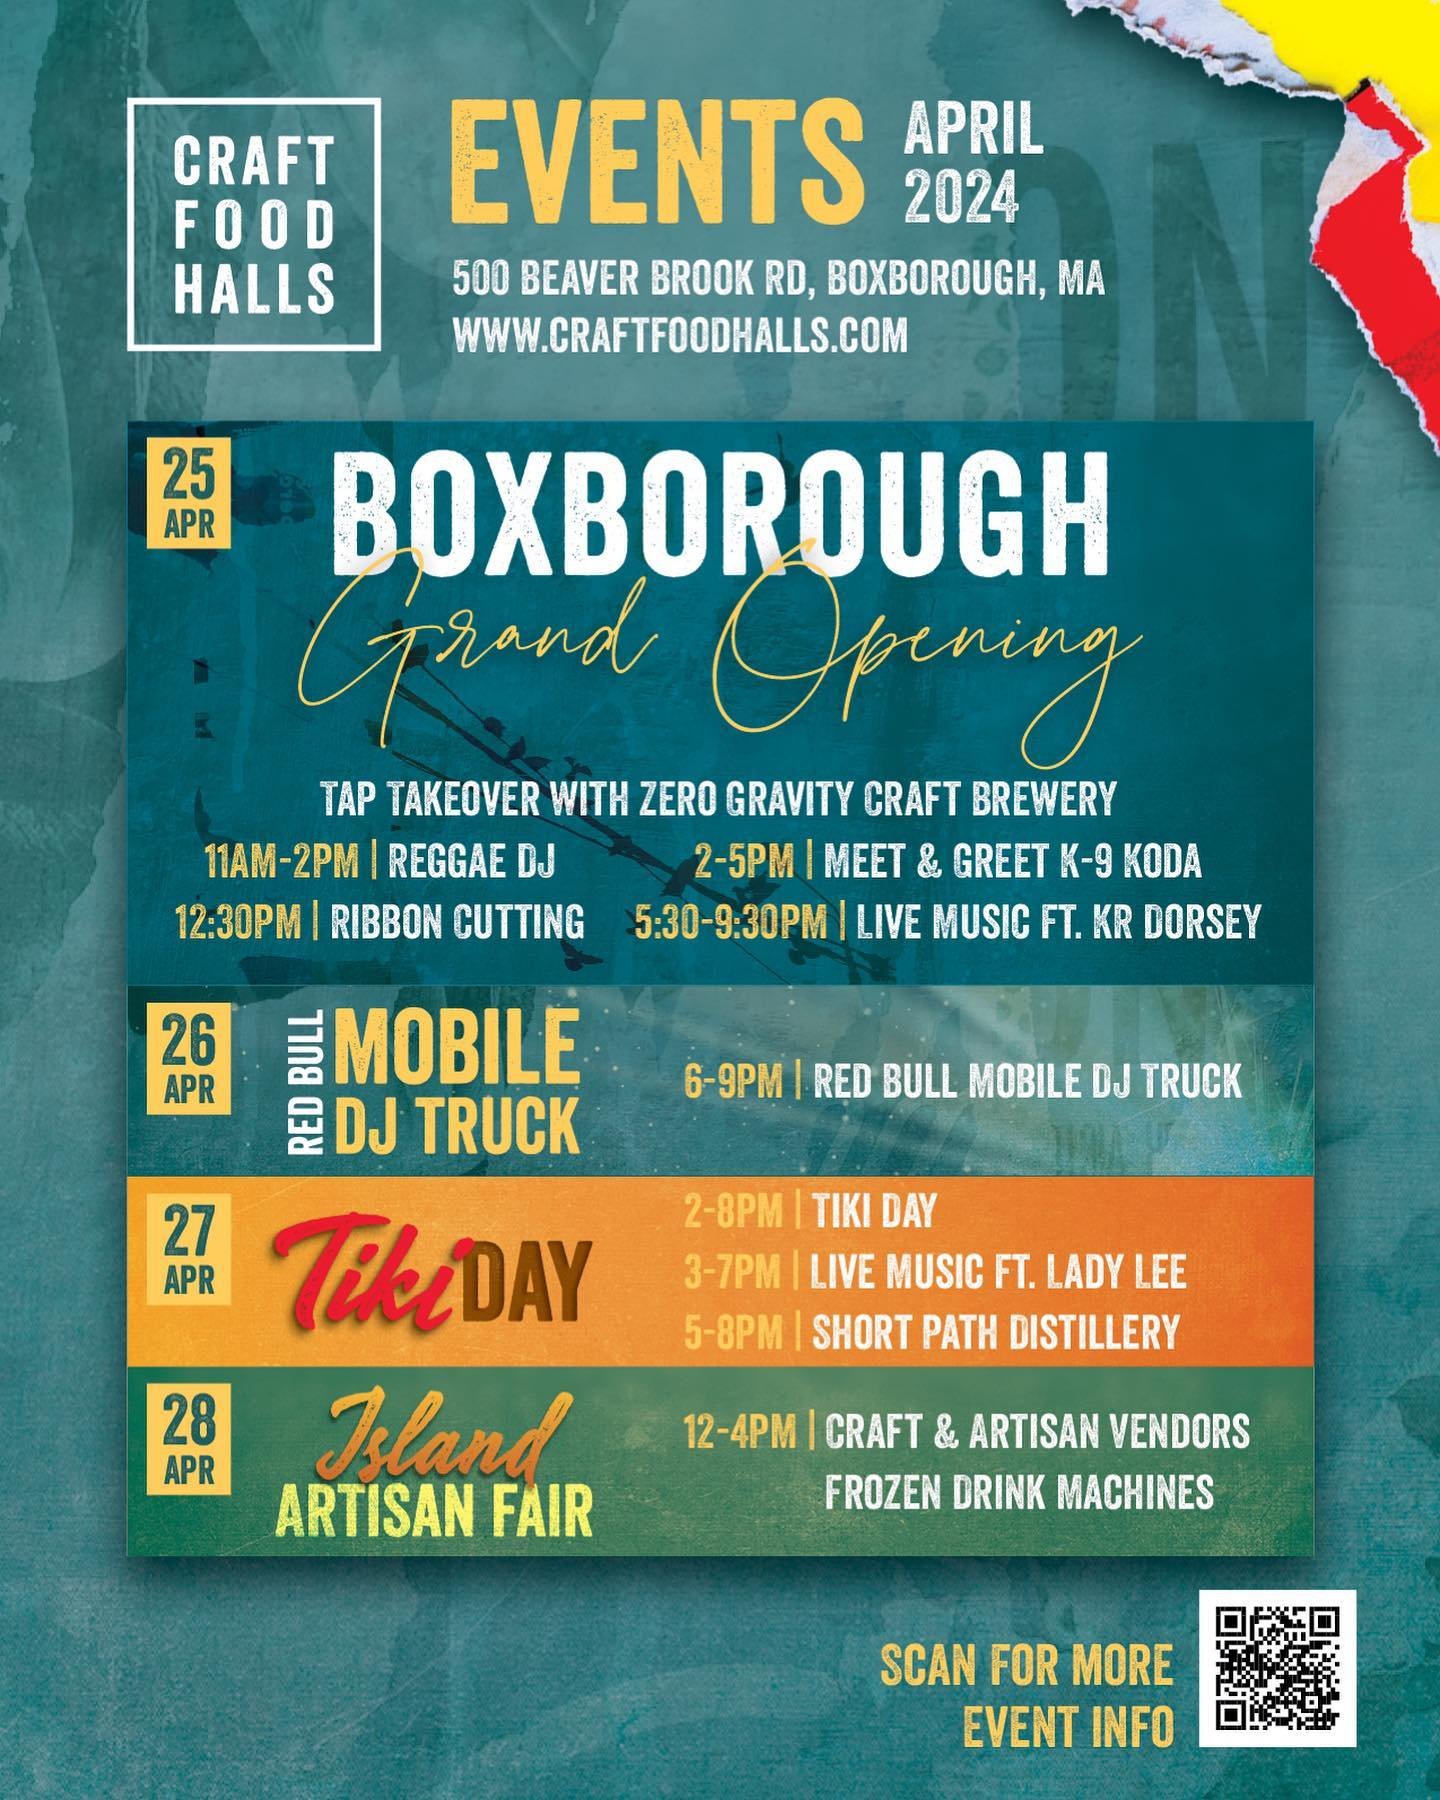 Don&rsquo;t miss this weekend&rsquo;s fun events at Boxborough&rsquo;s NEW @craftfoodhalls !! The vibe is awesome and the huge outdoor patio with live music is JUST the spot for the warm weather and sunshine! ☀️ #boxboroughma #lovewhereyoulive #craft